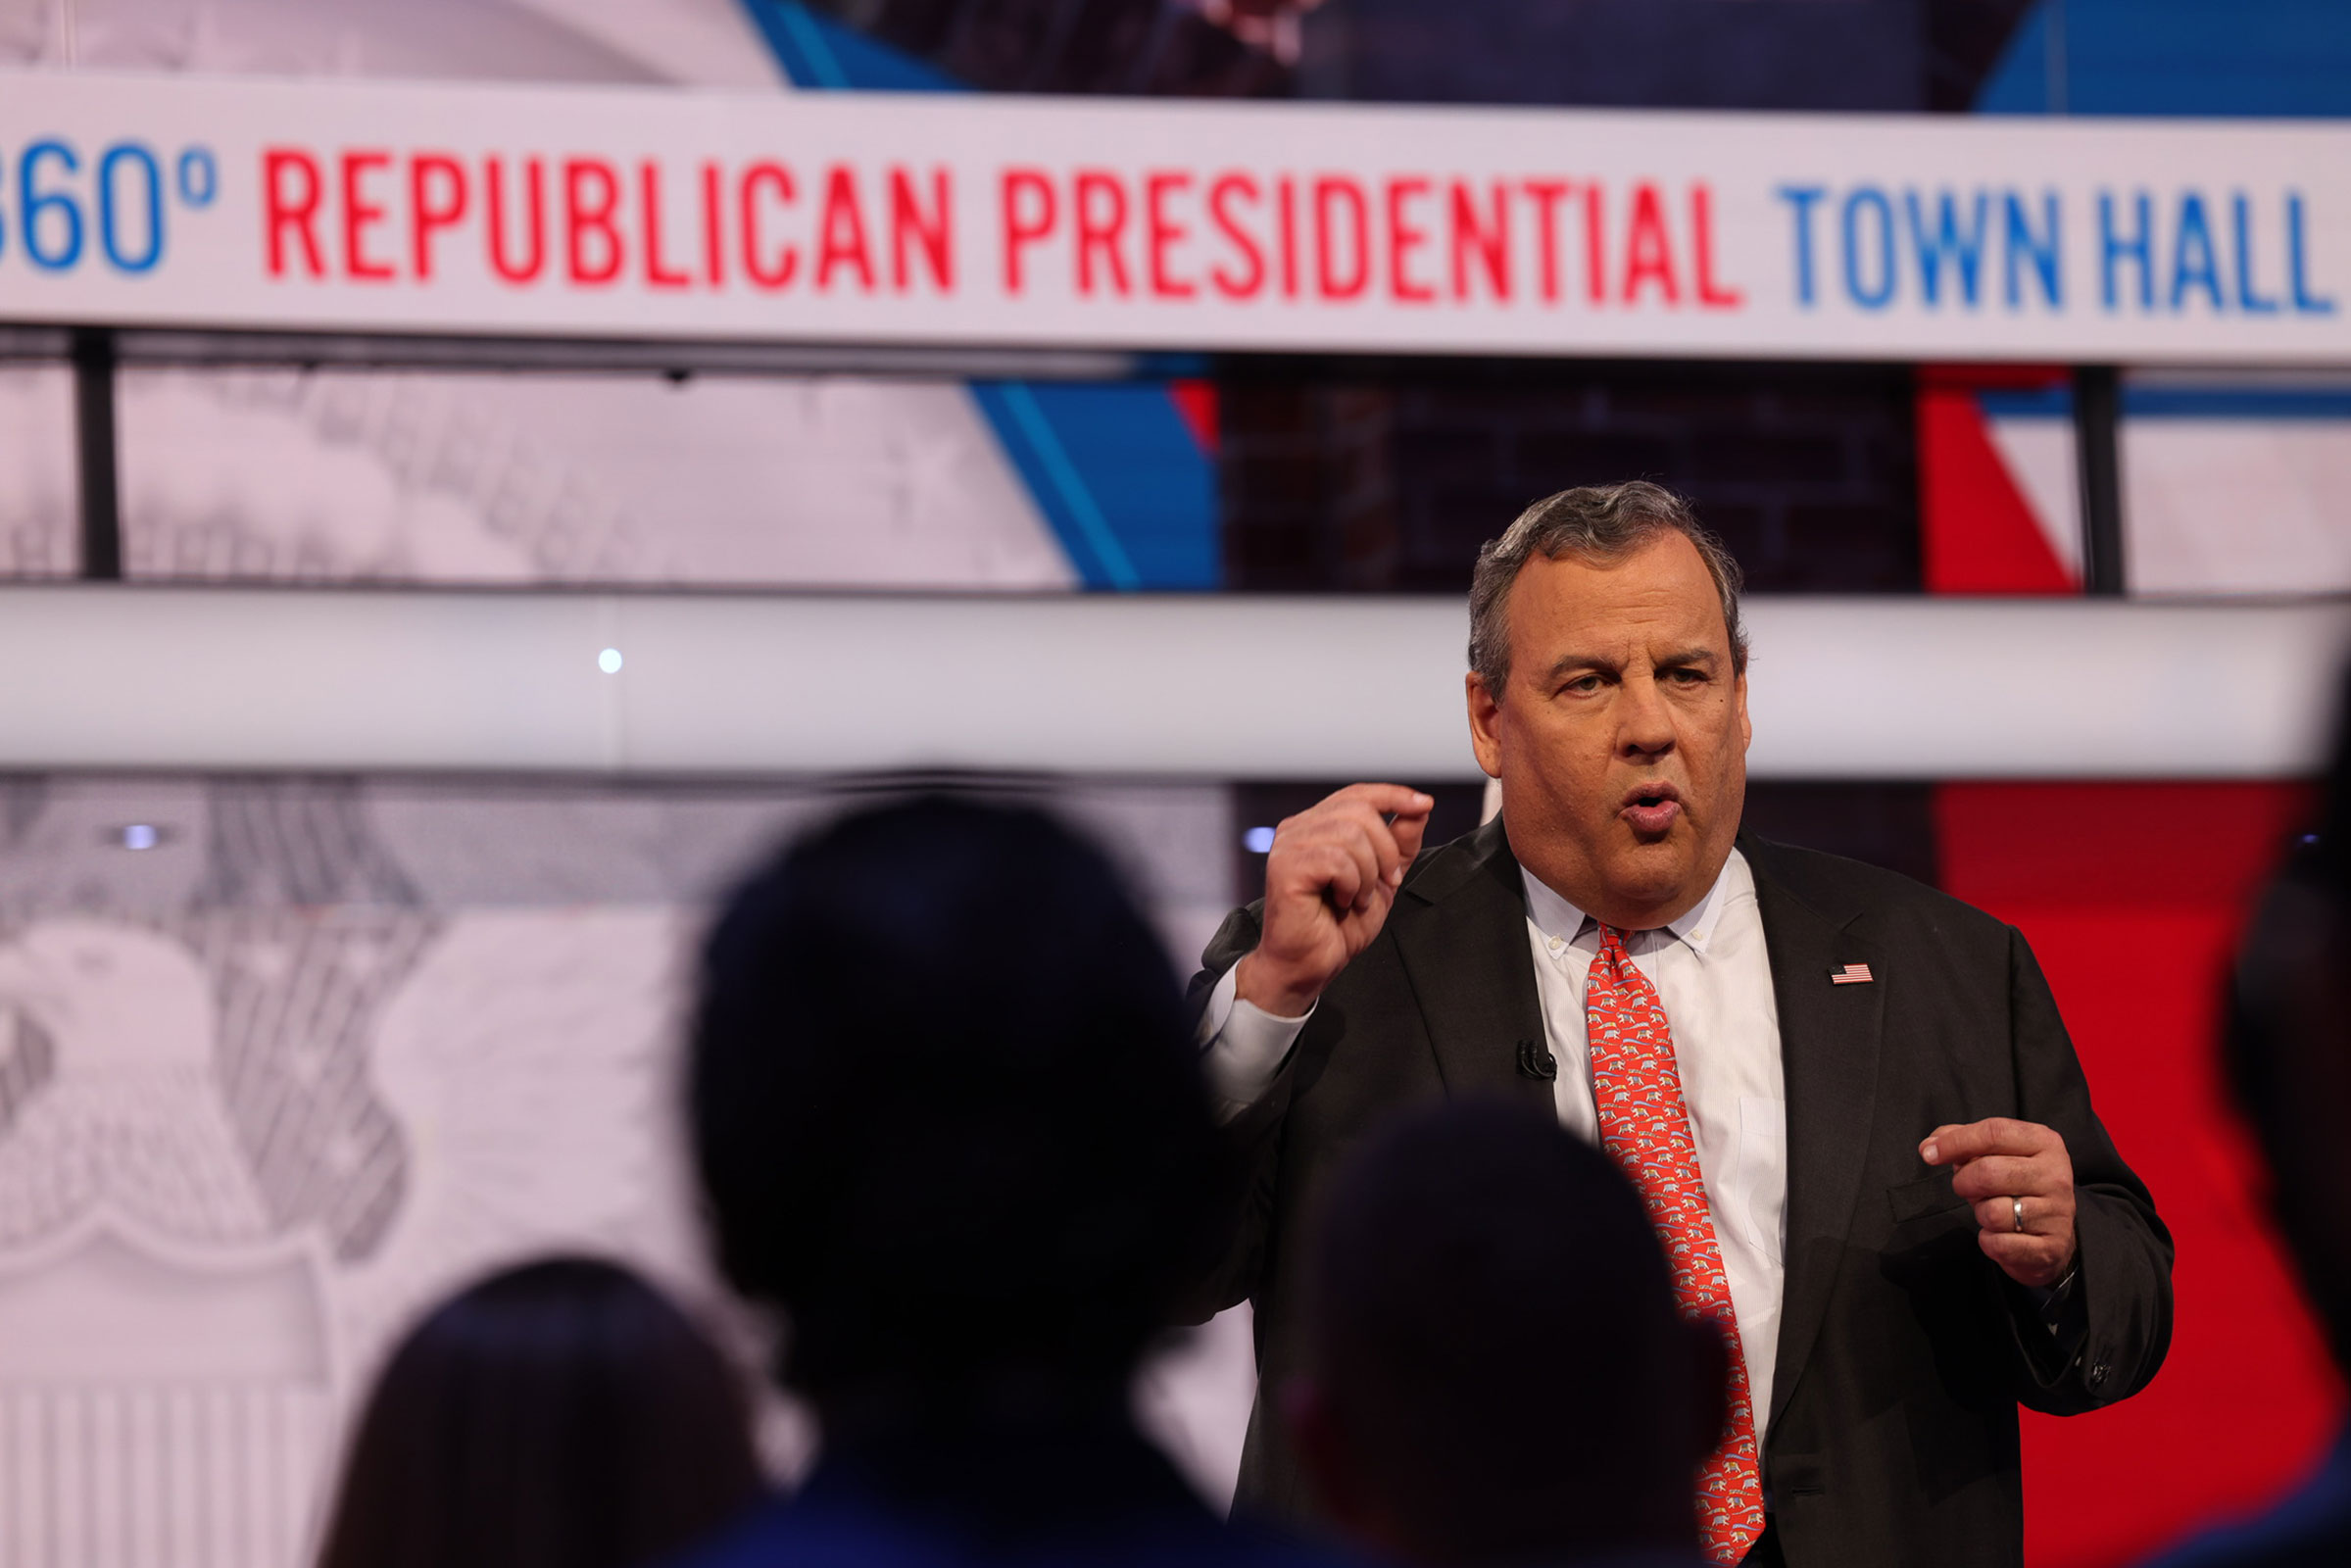 Former New Jersey Gov. Chris Christie speaks at a CNN Republican Presidential Town Hall moderated by CNN’s Anderson Cooper in New York on Monday, June 12.